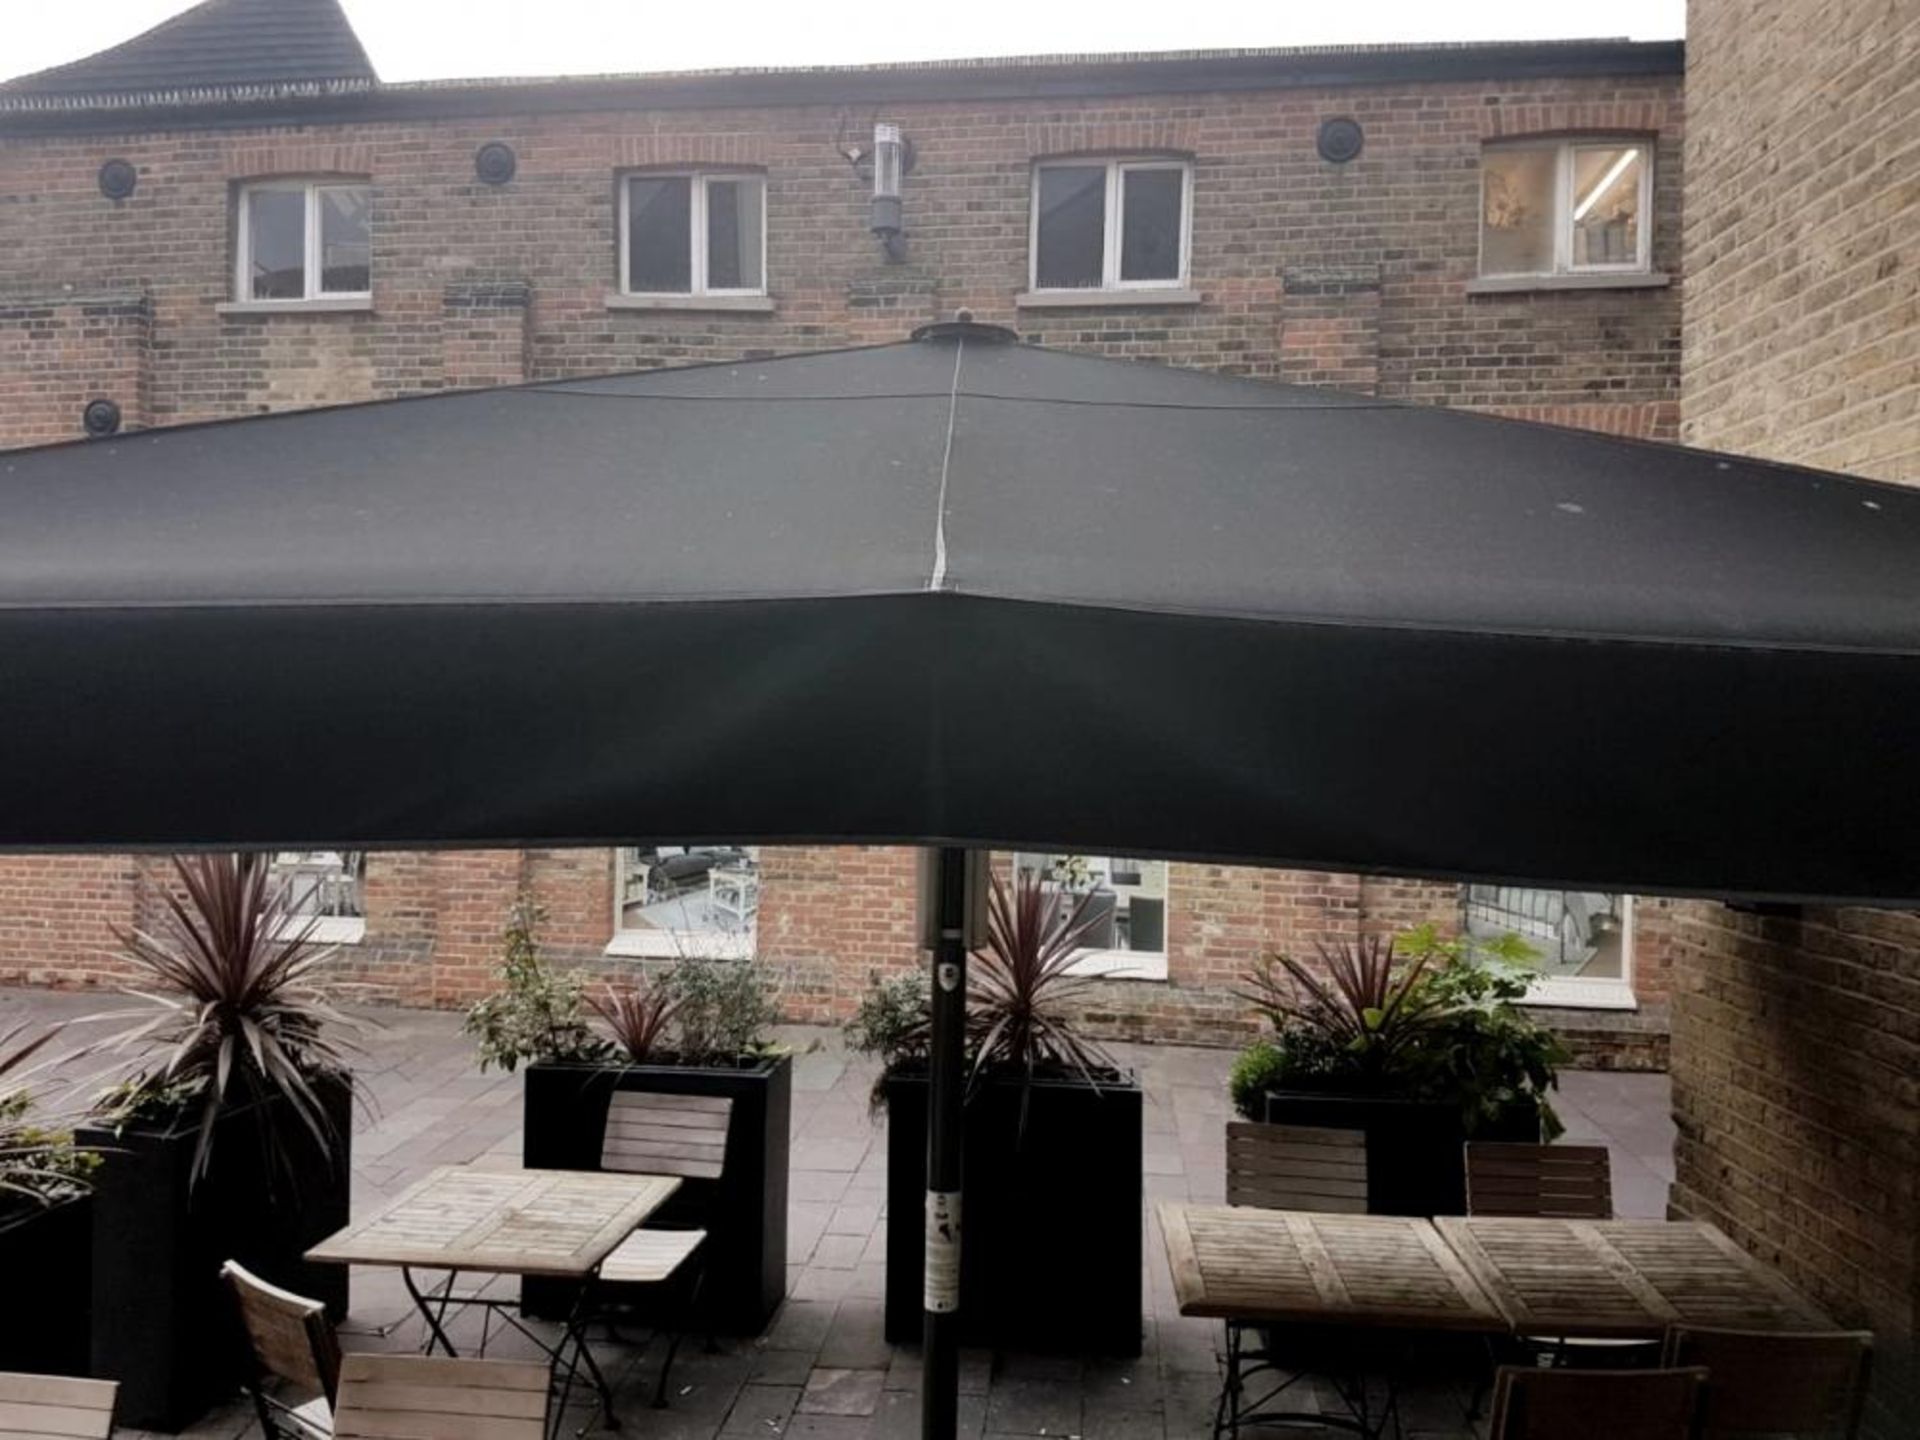 1 x Large Commercial Garden Patio Parasol With 4 x IR Heaters - Recently Removed From A City Centre - Image 3 of 5